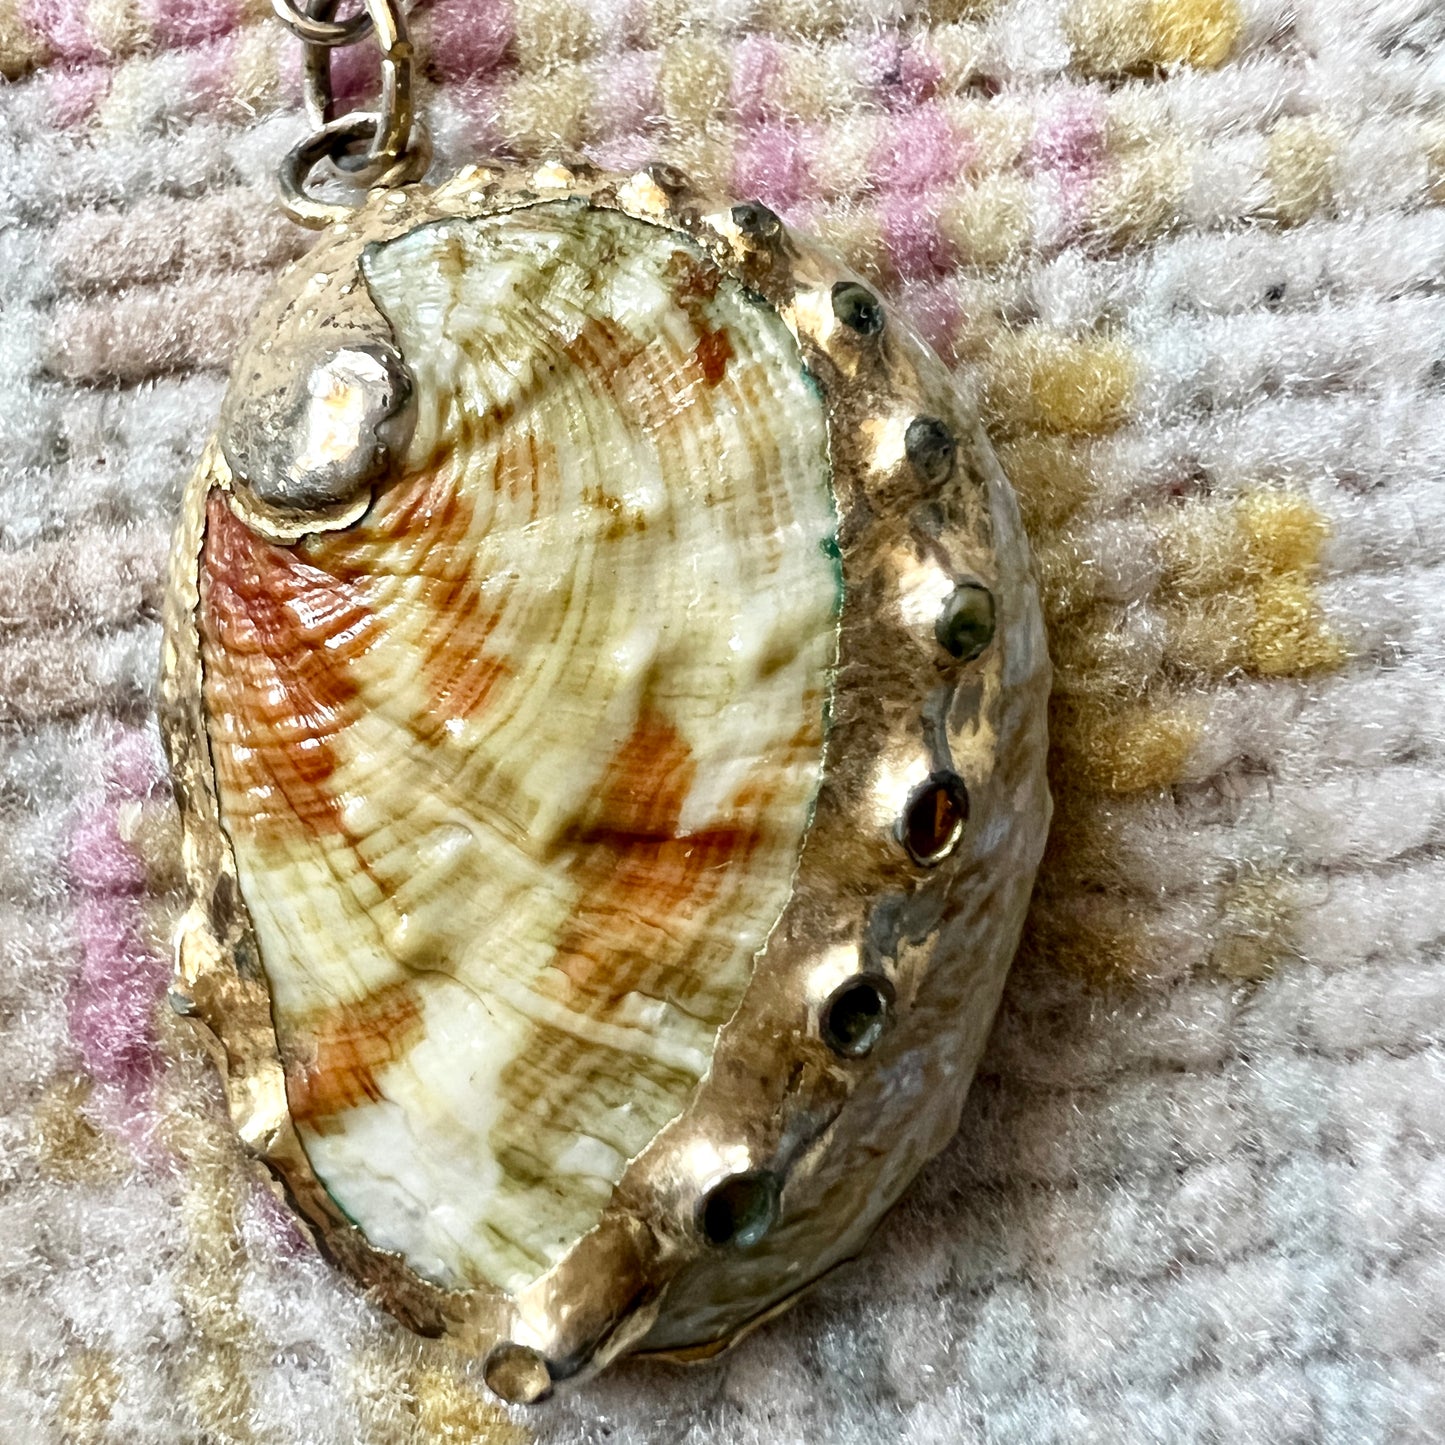 [AS-IS] Vintage Gilded Abalone Shell Earrings